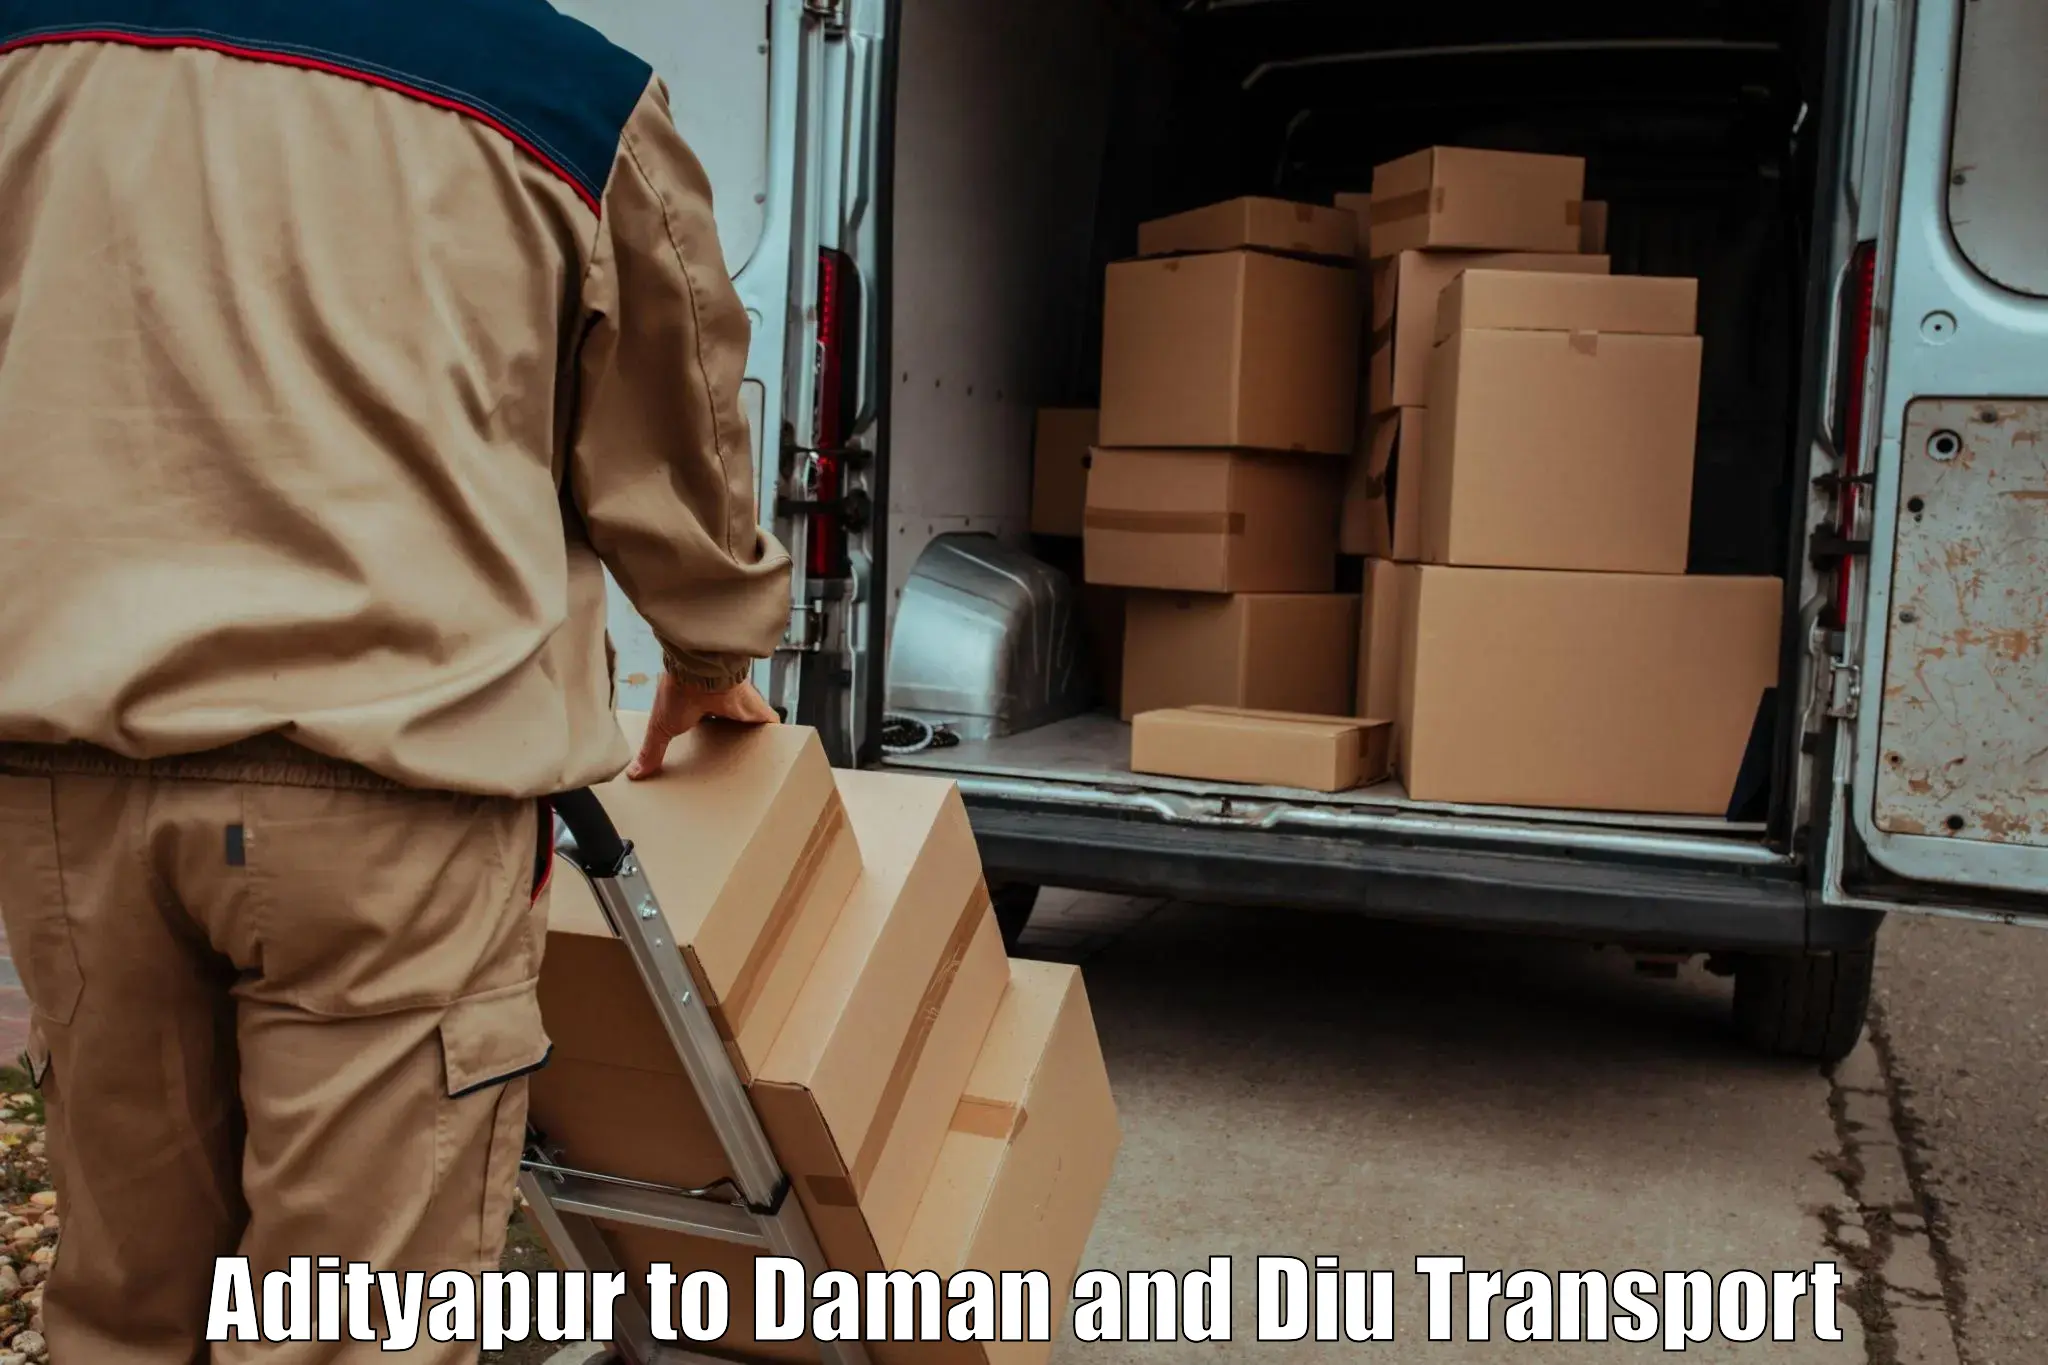 Transport shared services Adityapur to Daman and Diu